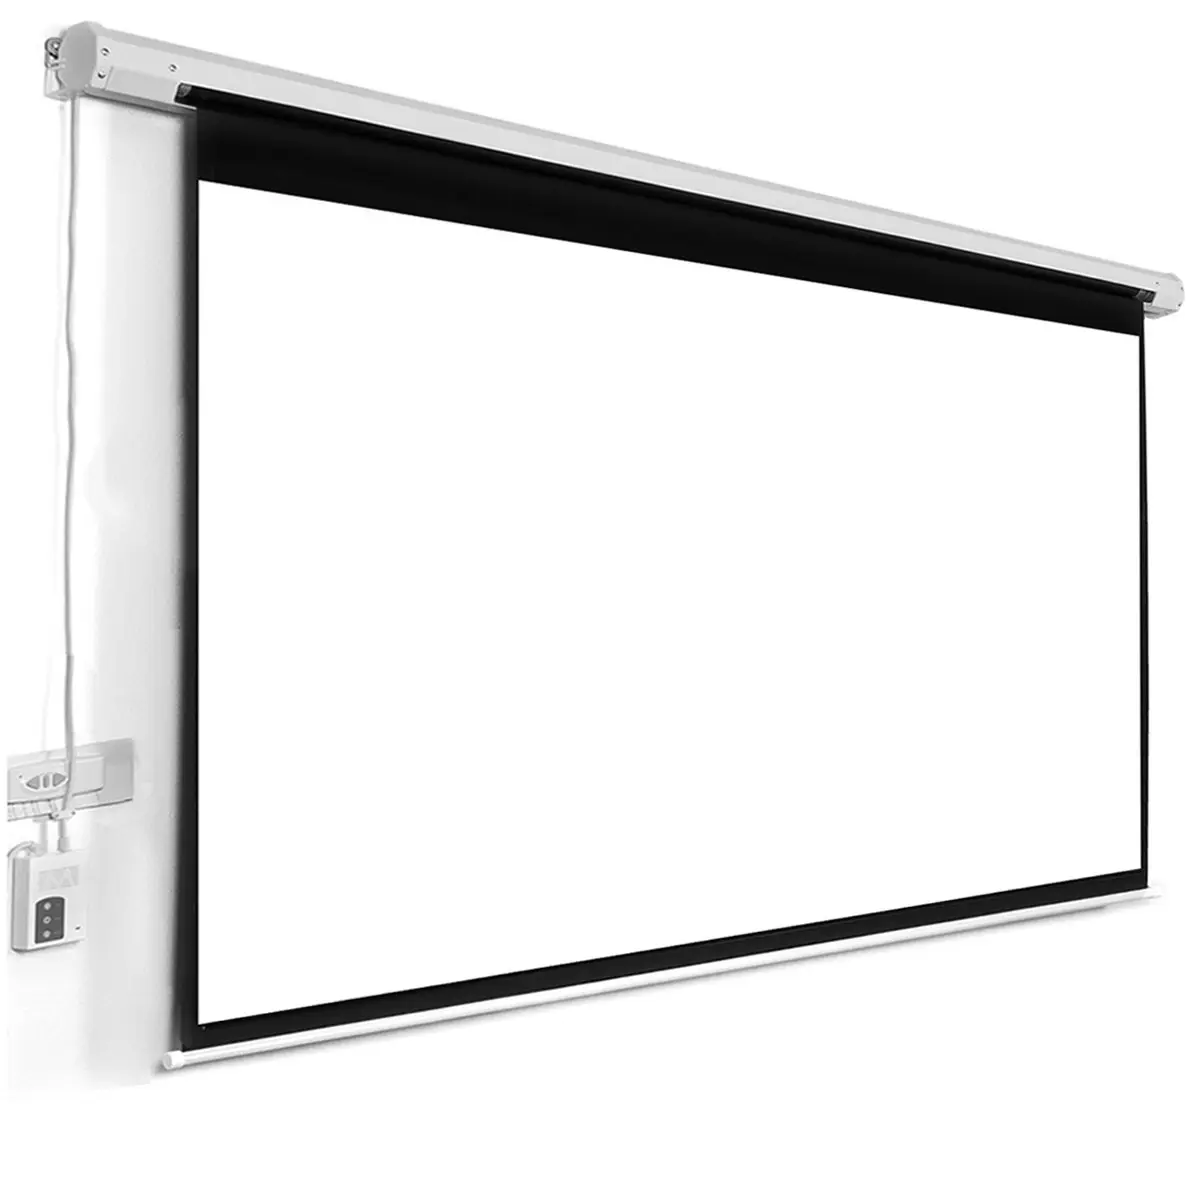 High Quality Electric Projection Screen Home Cinema Movie Wall Ceiling Hanging Electric Projector Screen For Lcd Dlp Projector